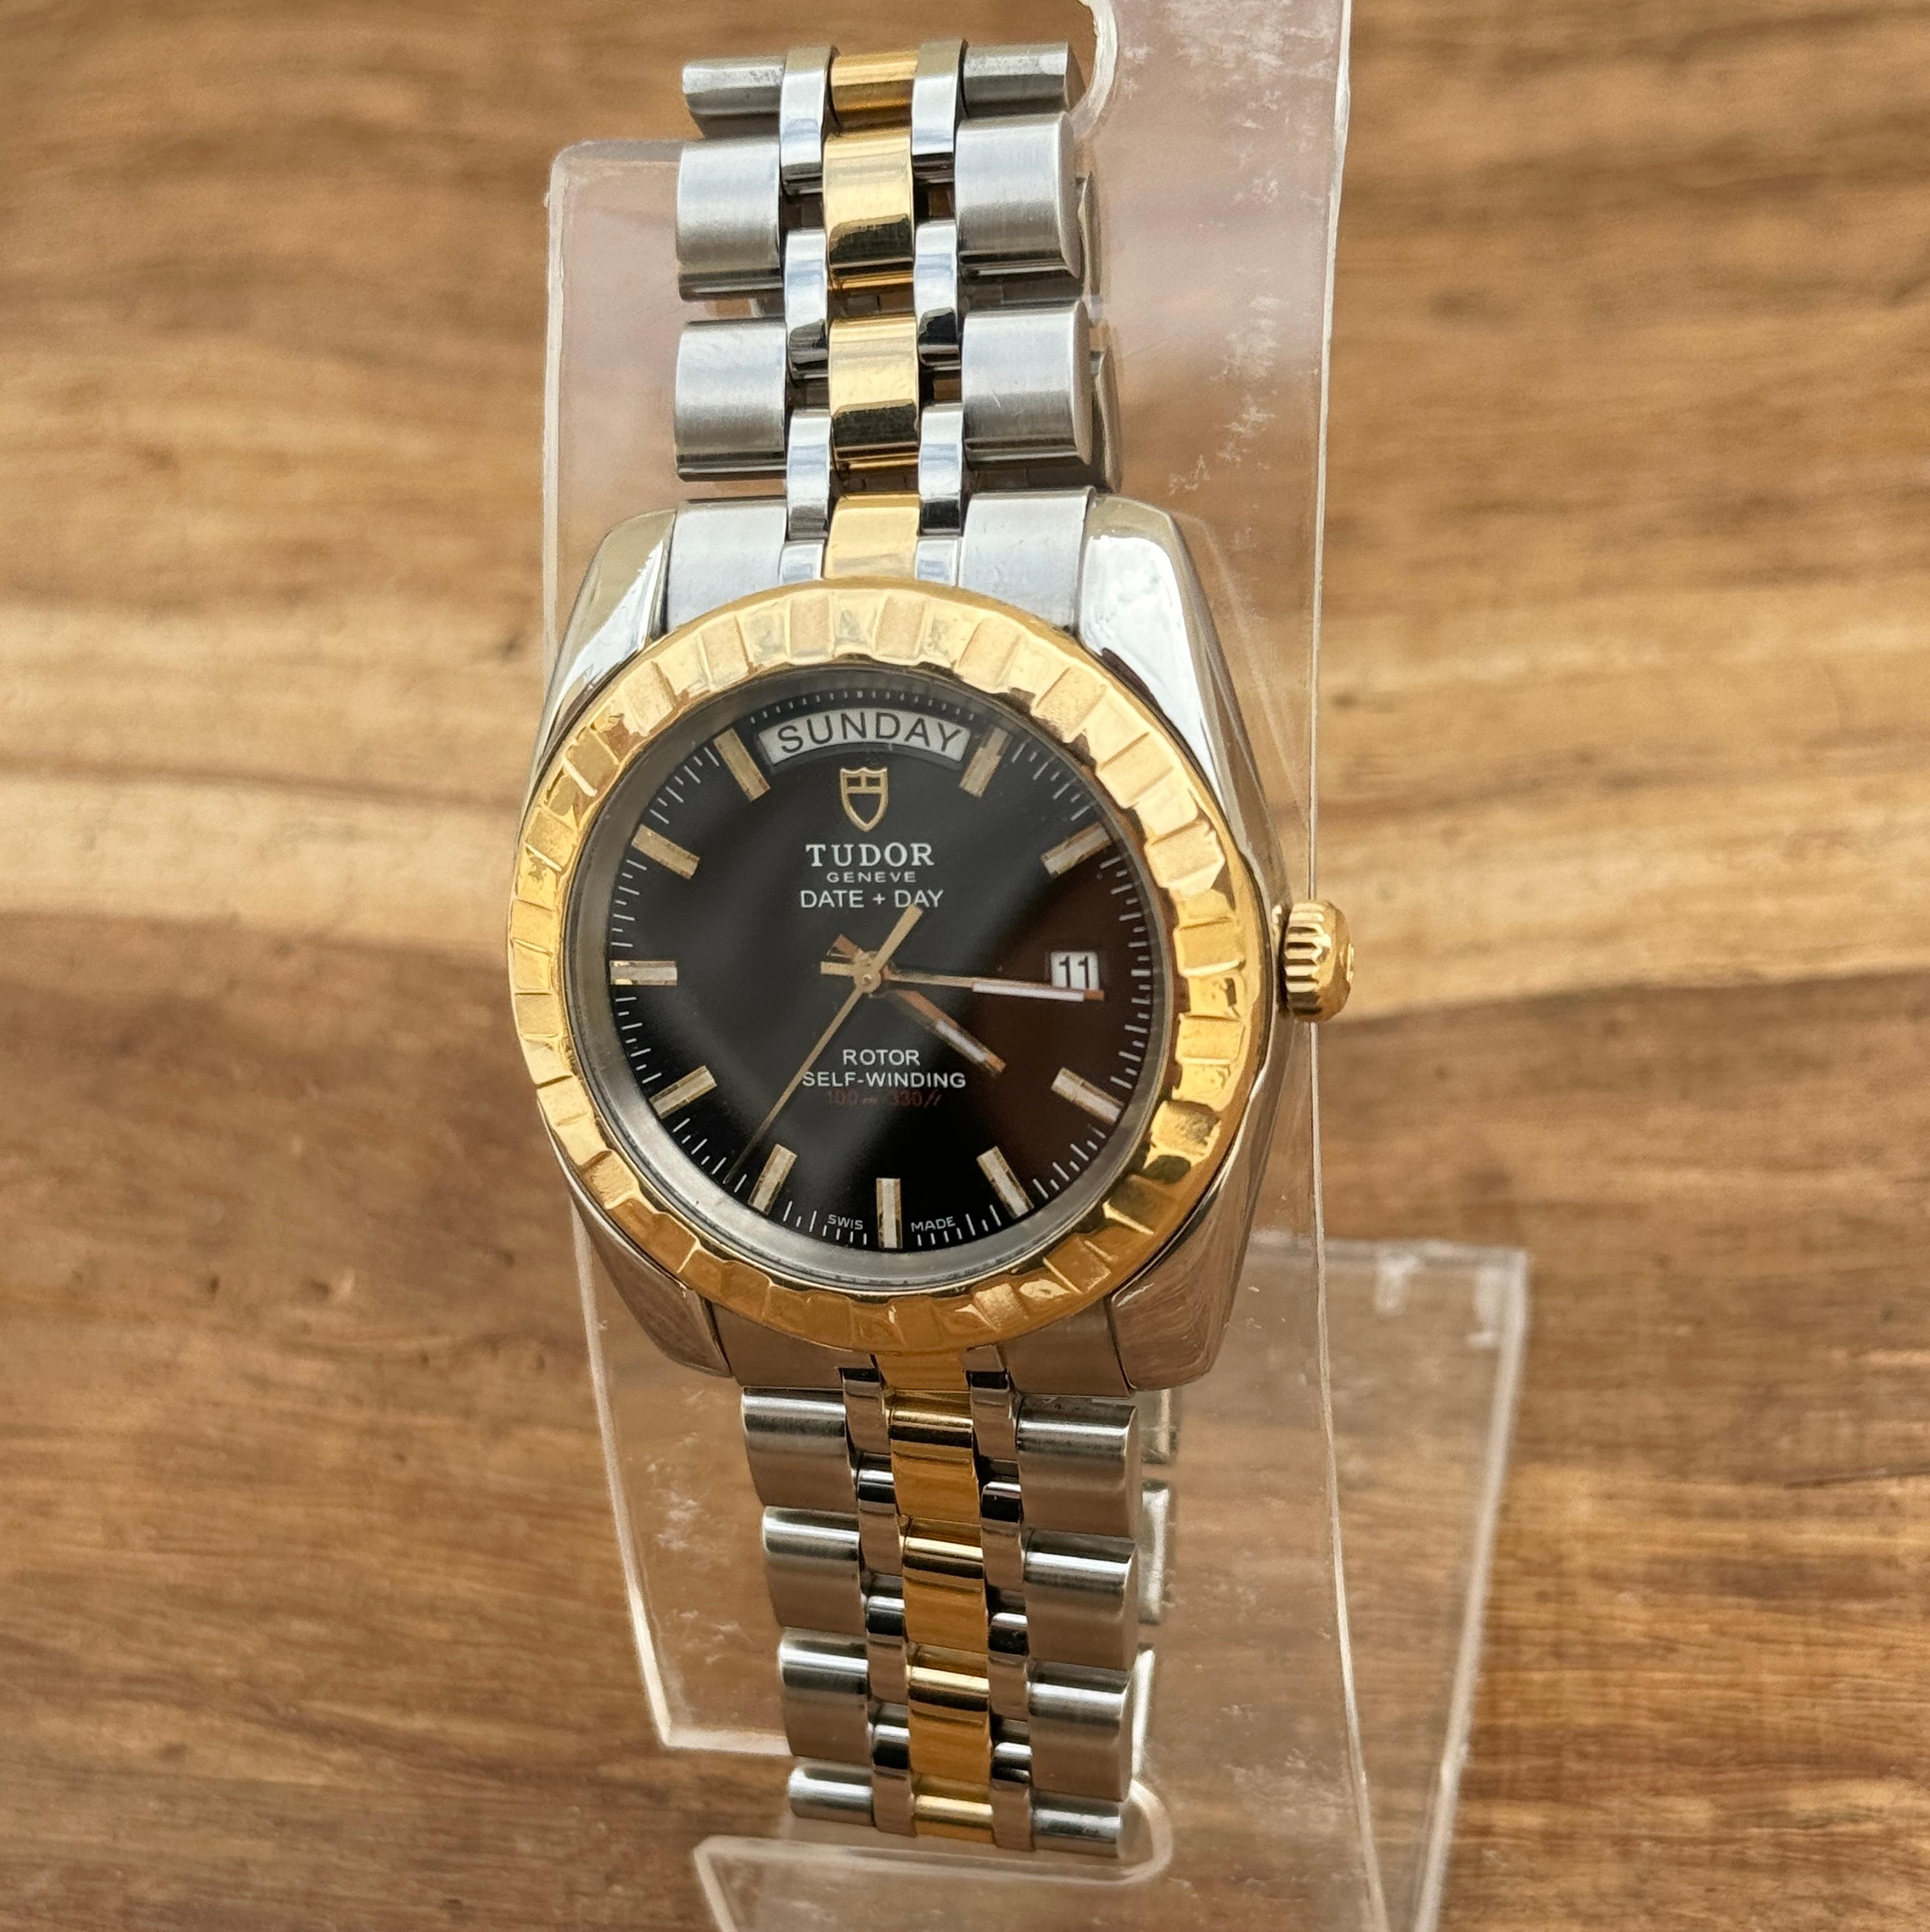 Tudor Classic Day Date 23013 Black Dial Watch For Sale 13